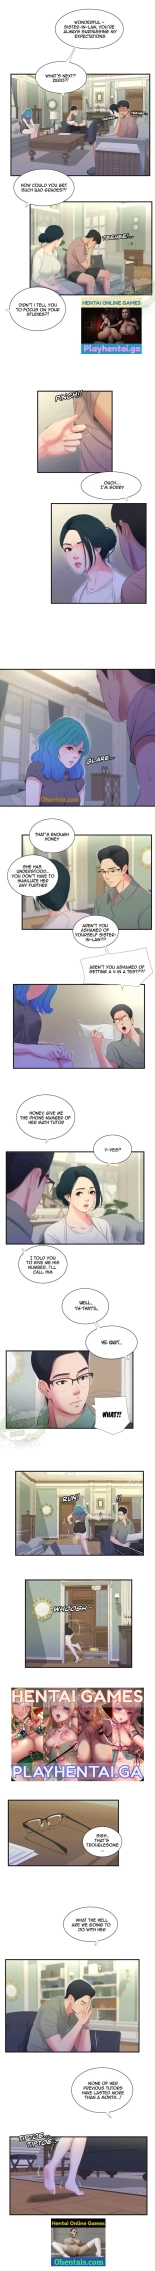 One's In-Laws Virgins Ch. 19-20 : page 3